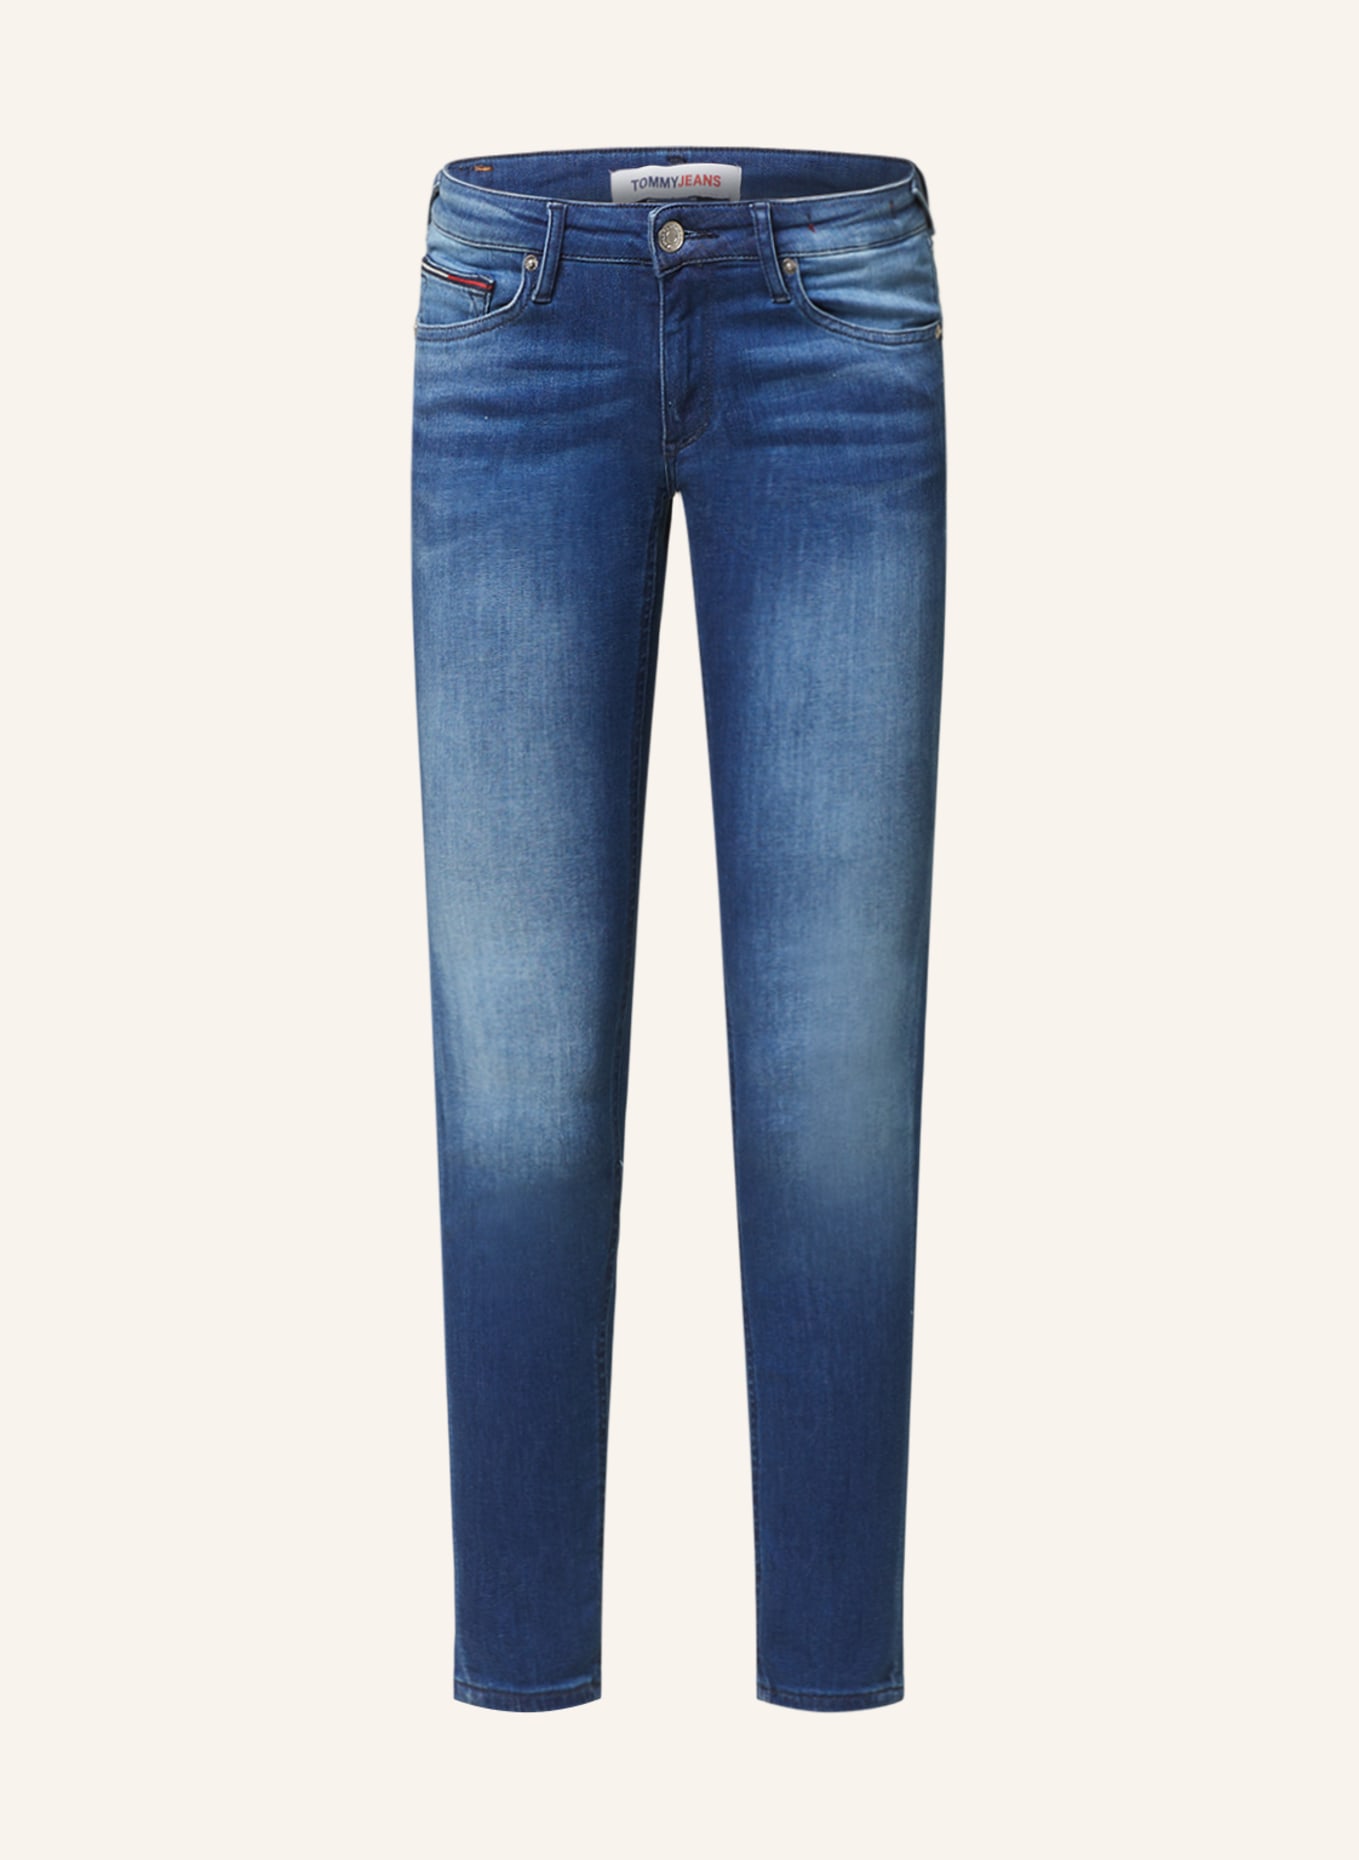 TOMMY JEANS Skinny Jeans SOPHIE, Farbe: 1A5 New Niceville Mid Blue Stretch (Bild 1)